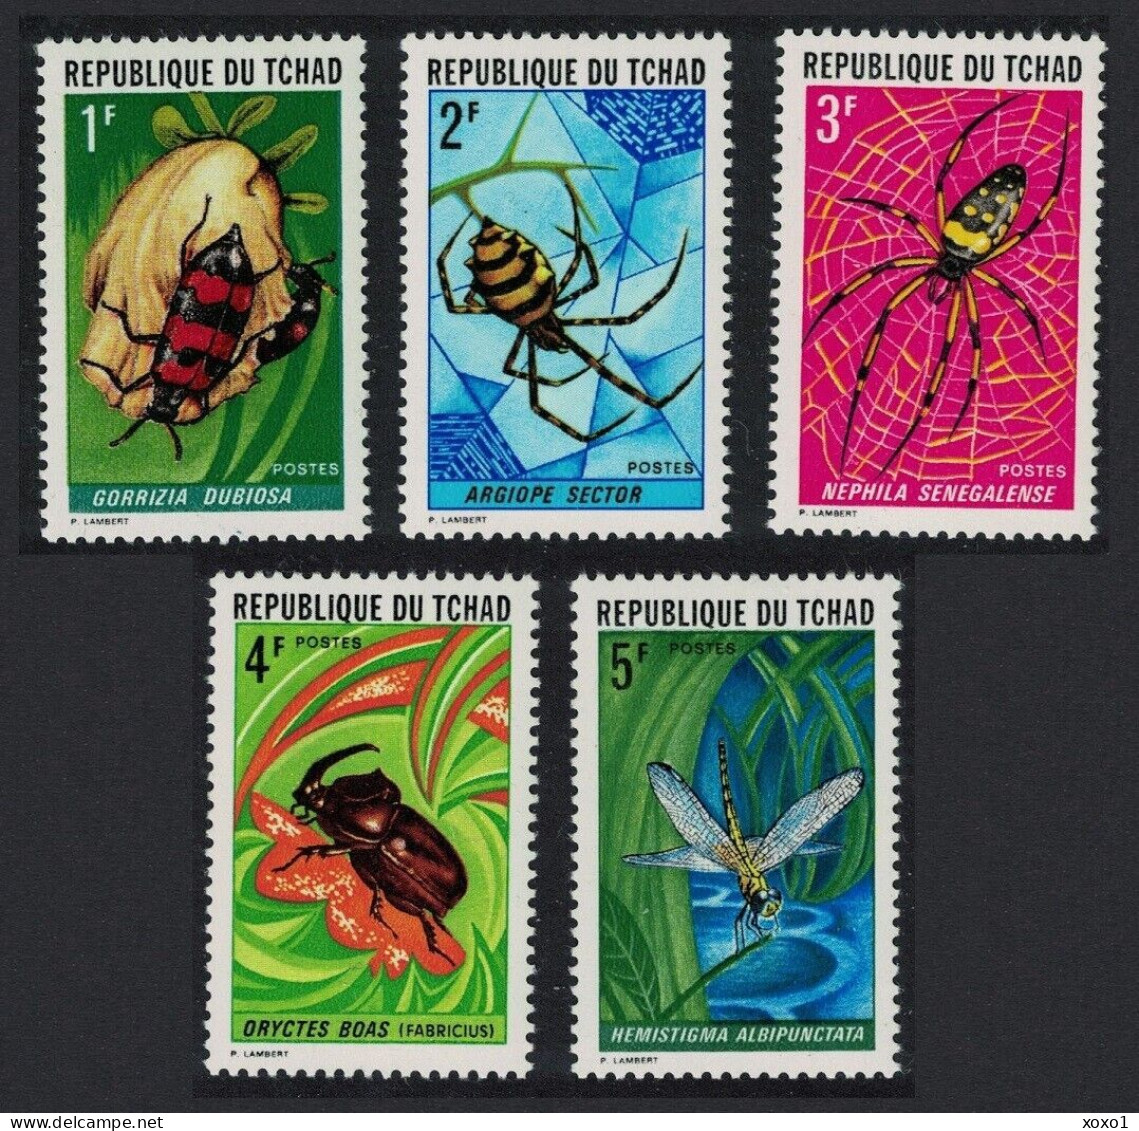 Chad 1972 MiNr. 510 - 514  Tschad Insects Spiders Bugs 5v MNH** 16,00 € - Spinnen